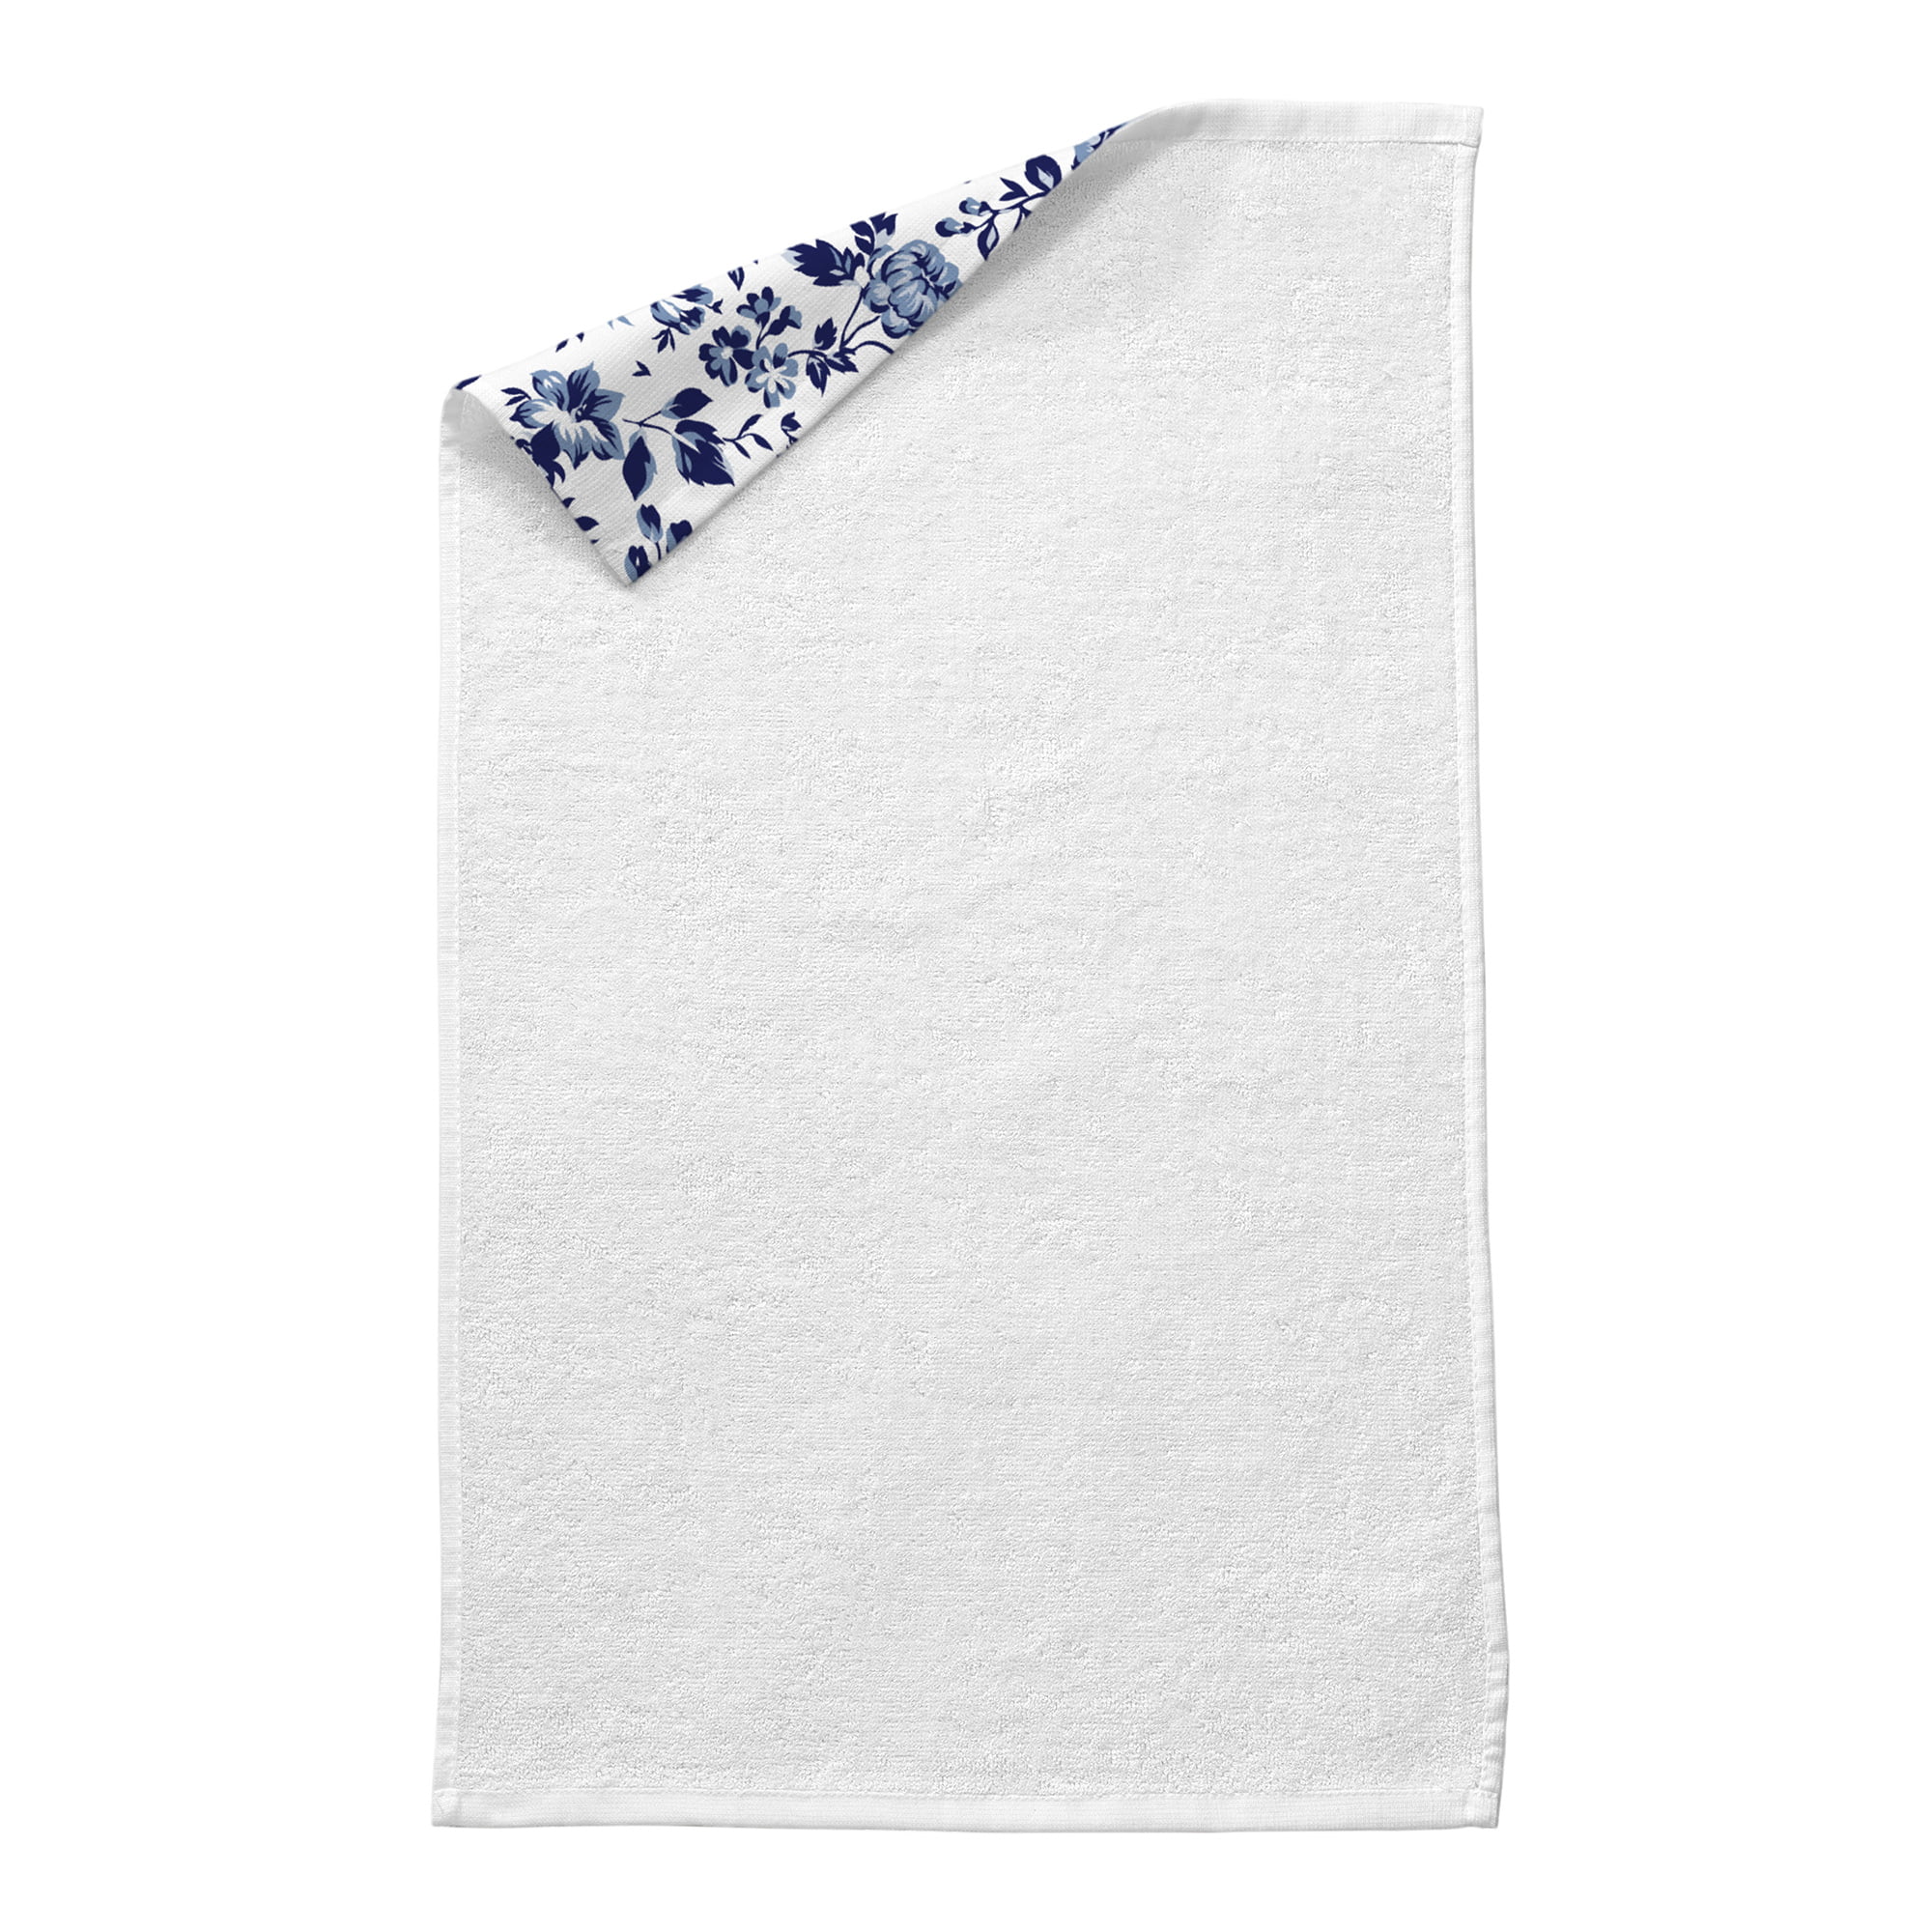 6 Pack of Premier Kitchen Towels: 15 x 25, Cotton, Popcorn Pattern, Color  Options Navy Case, Case of 144 - Fry's Food Stores